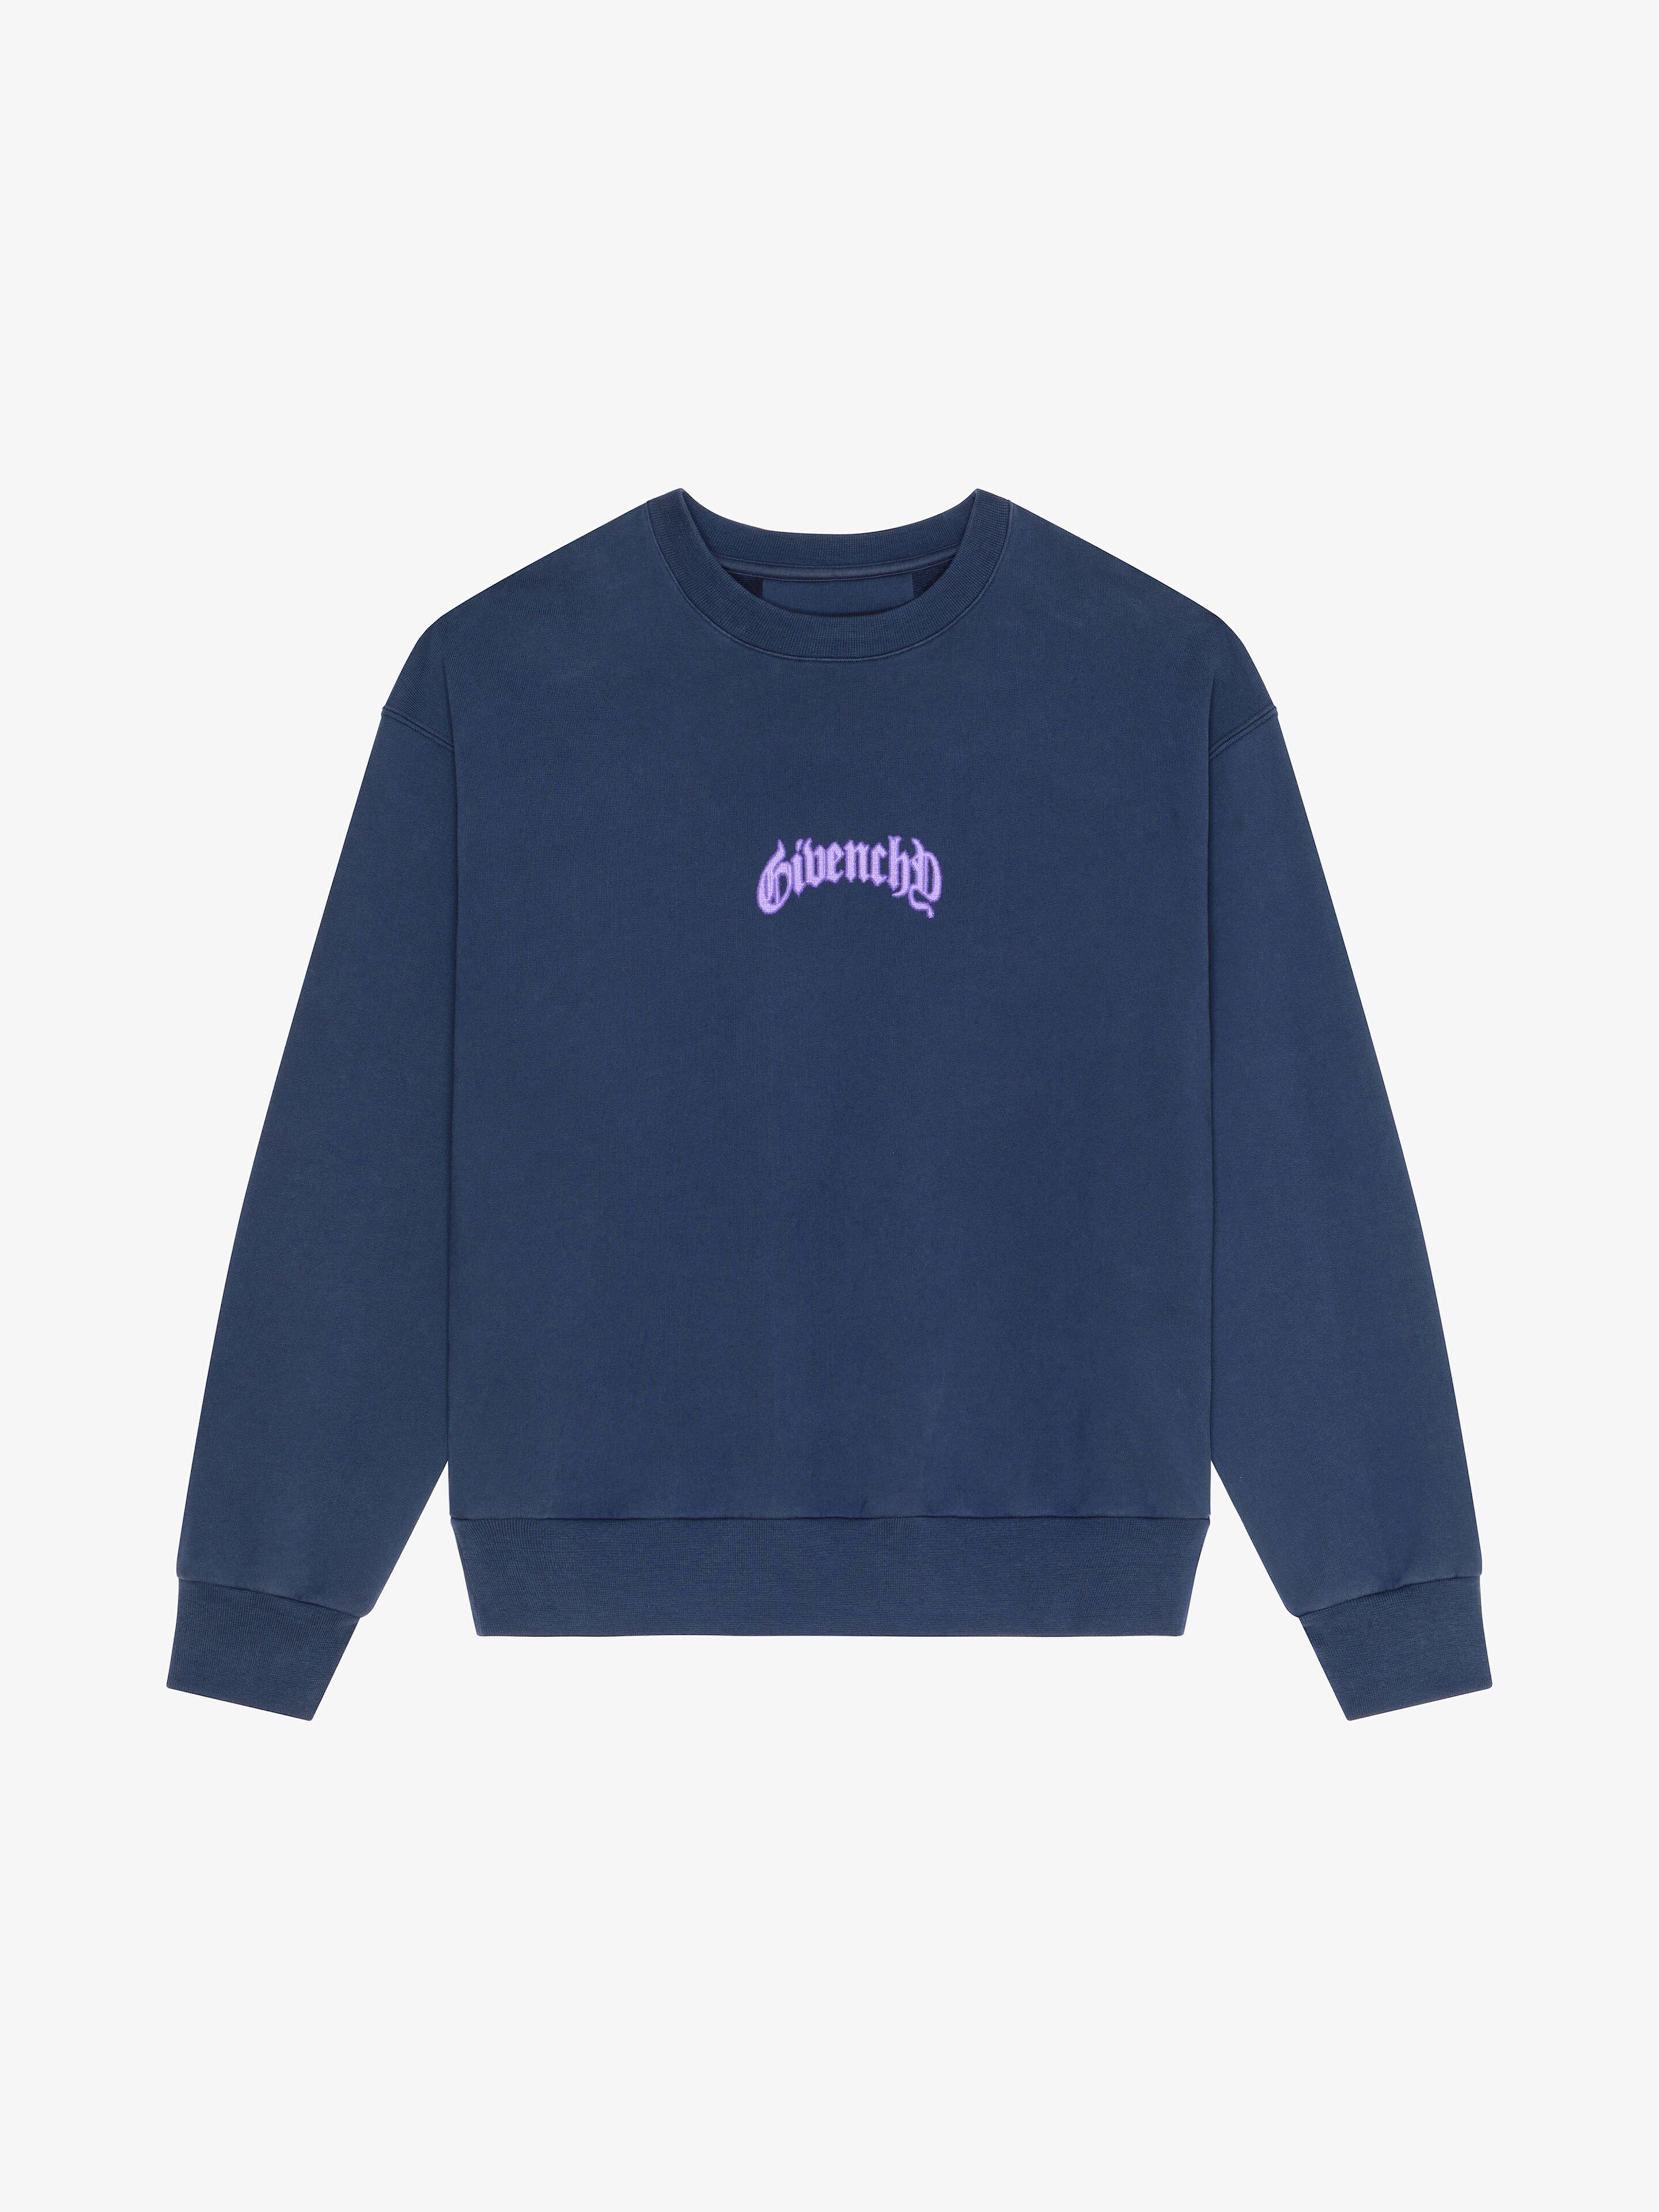 Givenchy Men's Boxy Fit Sweatshirt In Fleece With Reflective Artwork In Deep Blue